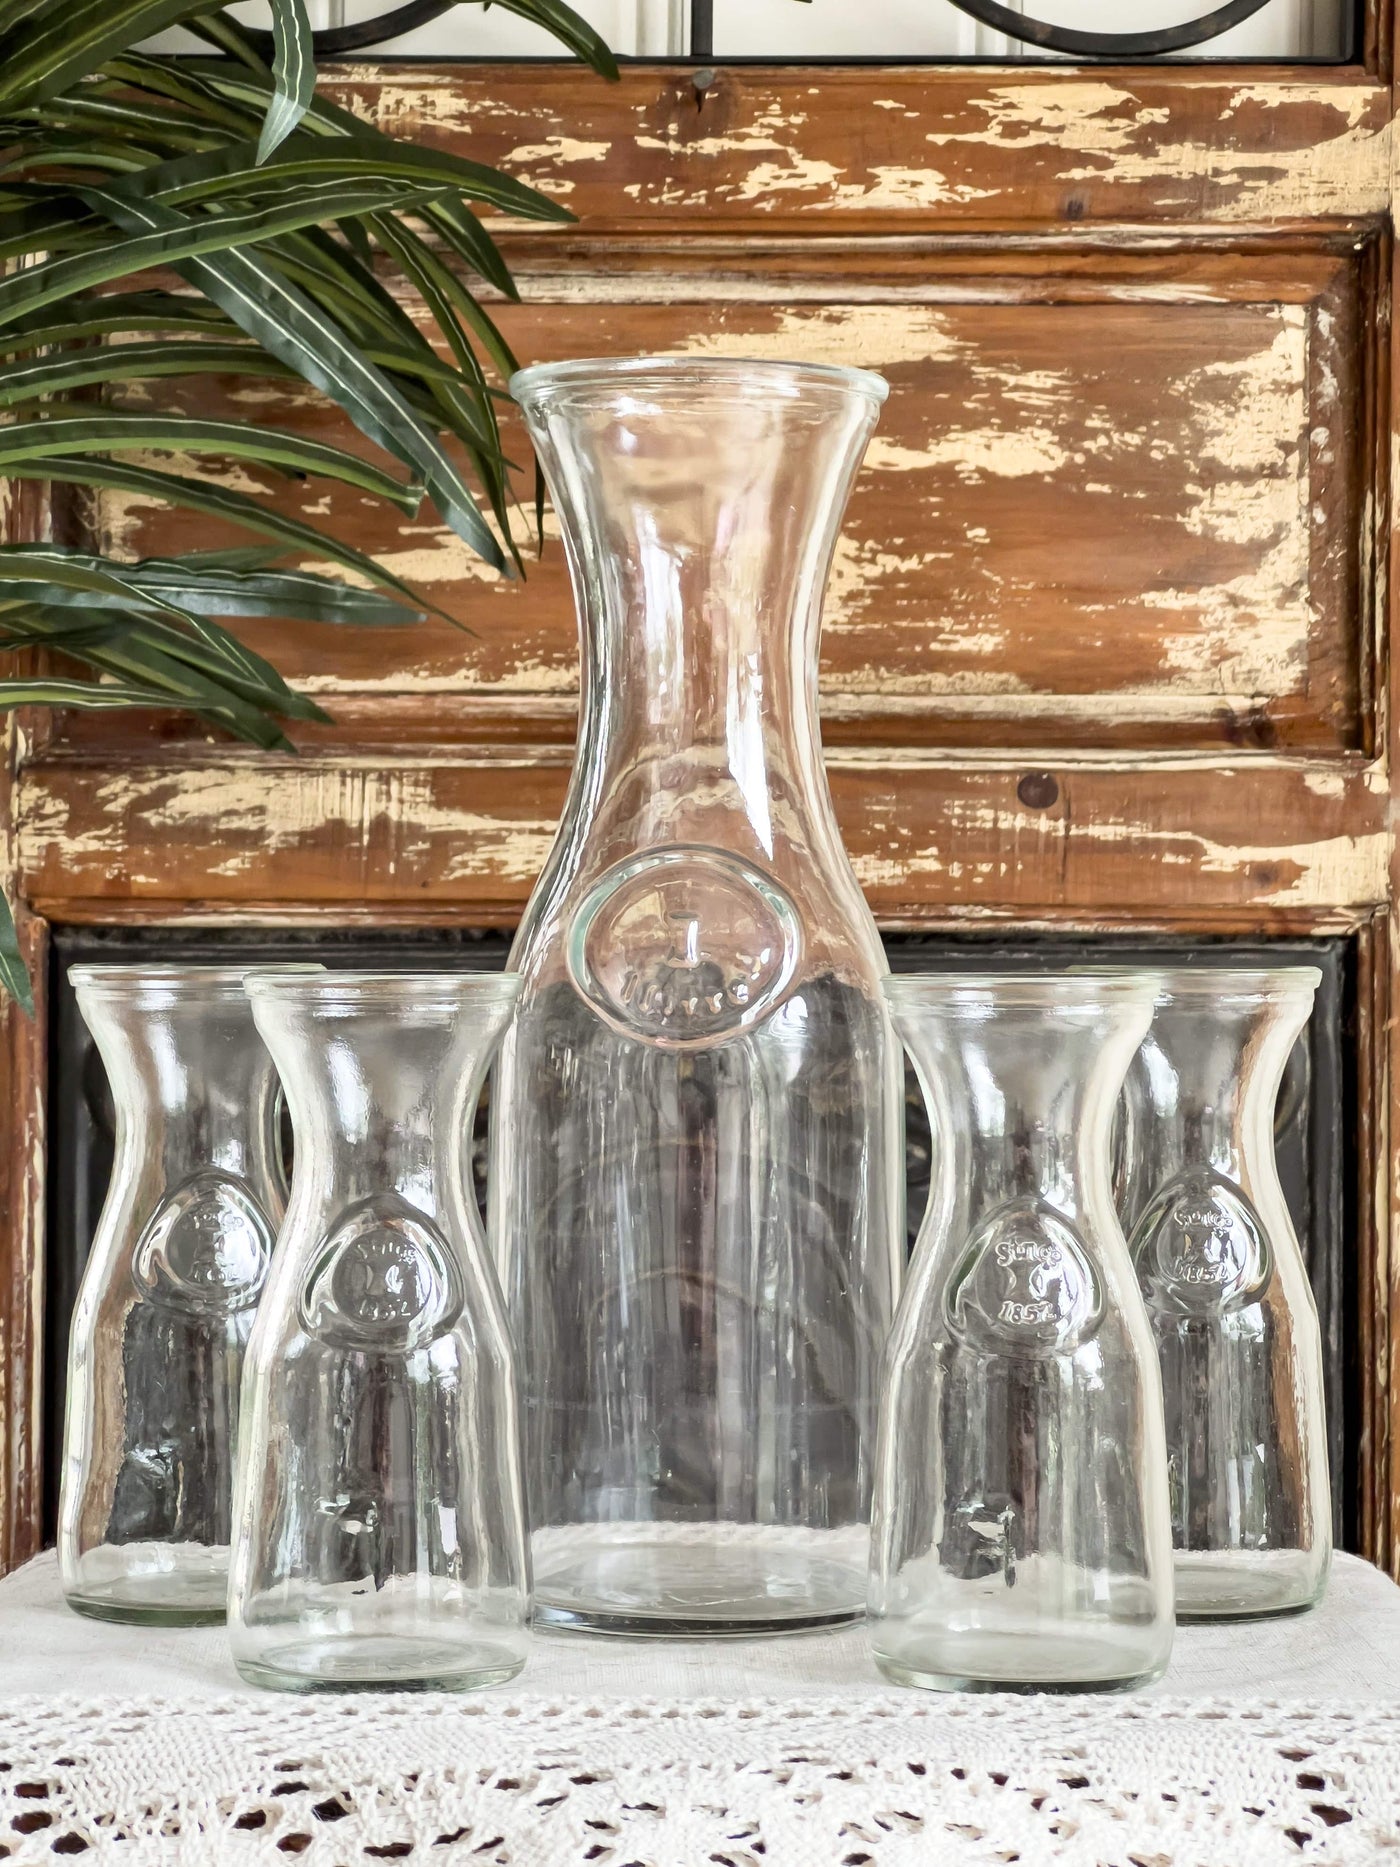 GLASS JUG SET Revive In Style Vintage Furniture Painted Refinished Redesign Beautiful One of a Kind Artistic Antique Unique Home Decor Interior Design French Country Shabby Chic Cottage Farmhouse Grandmillenial Coastal Chalk Paint Metallic Glam Eclectic Quality Dovetailed Rustic Furniture Painter Pinterest Bedroom Living Room Entryway Kitchen Home Trends House Styles Decorating ideas